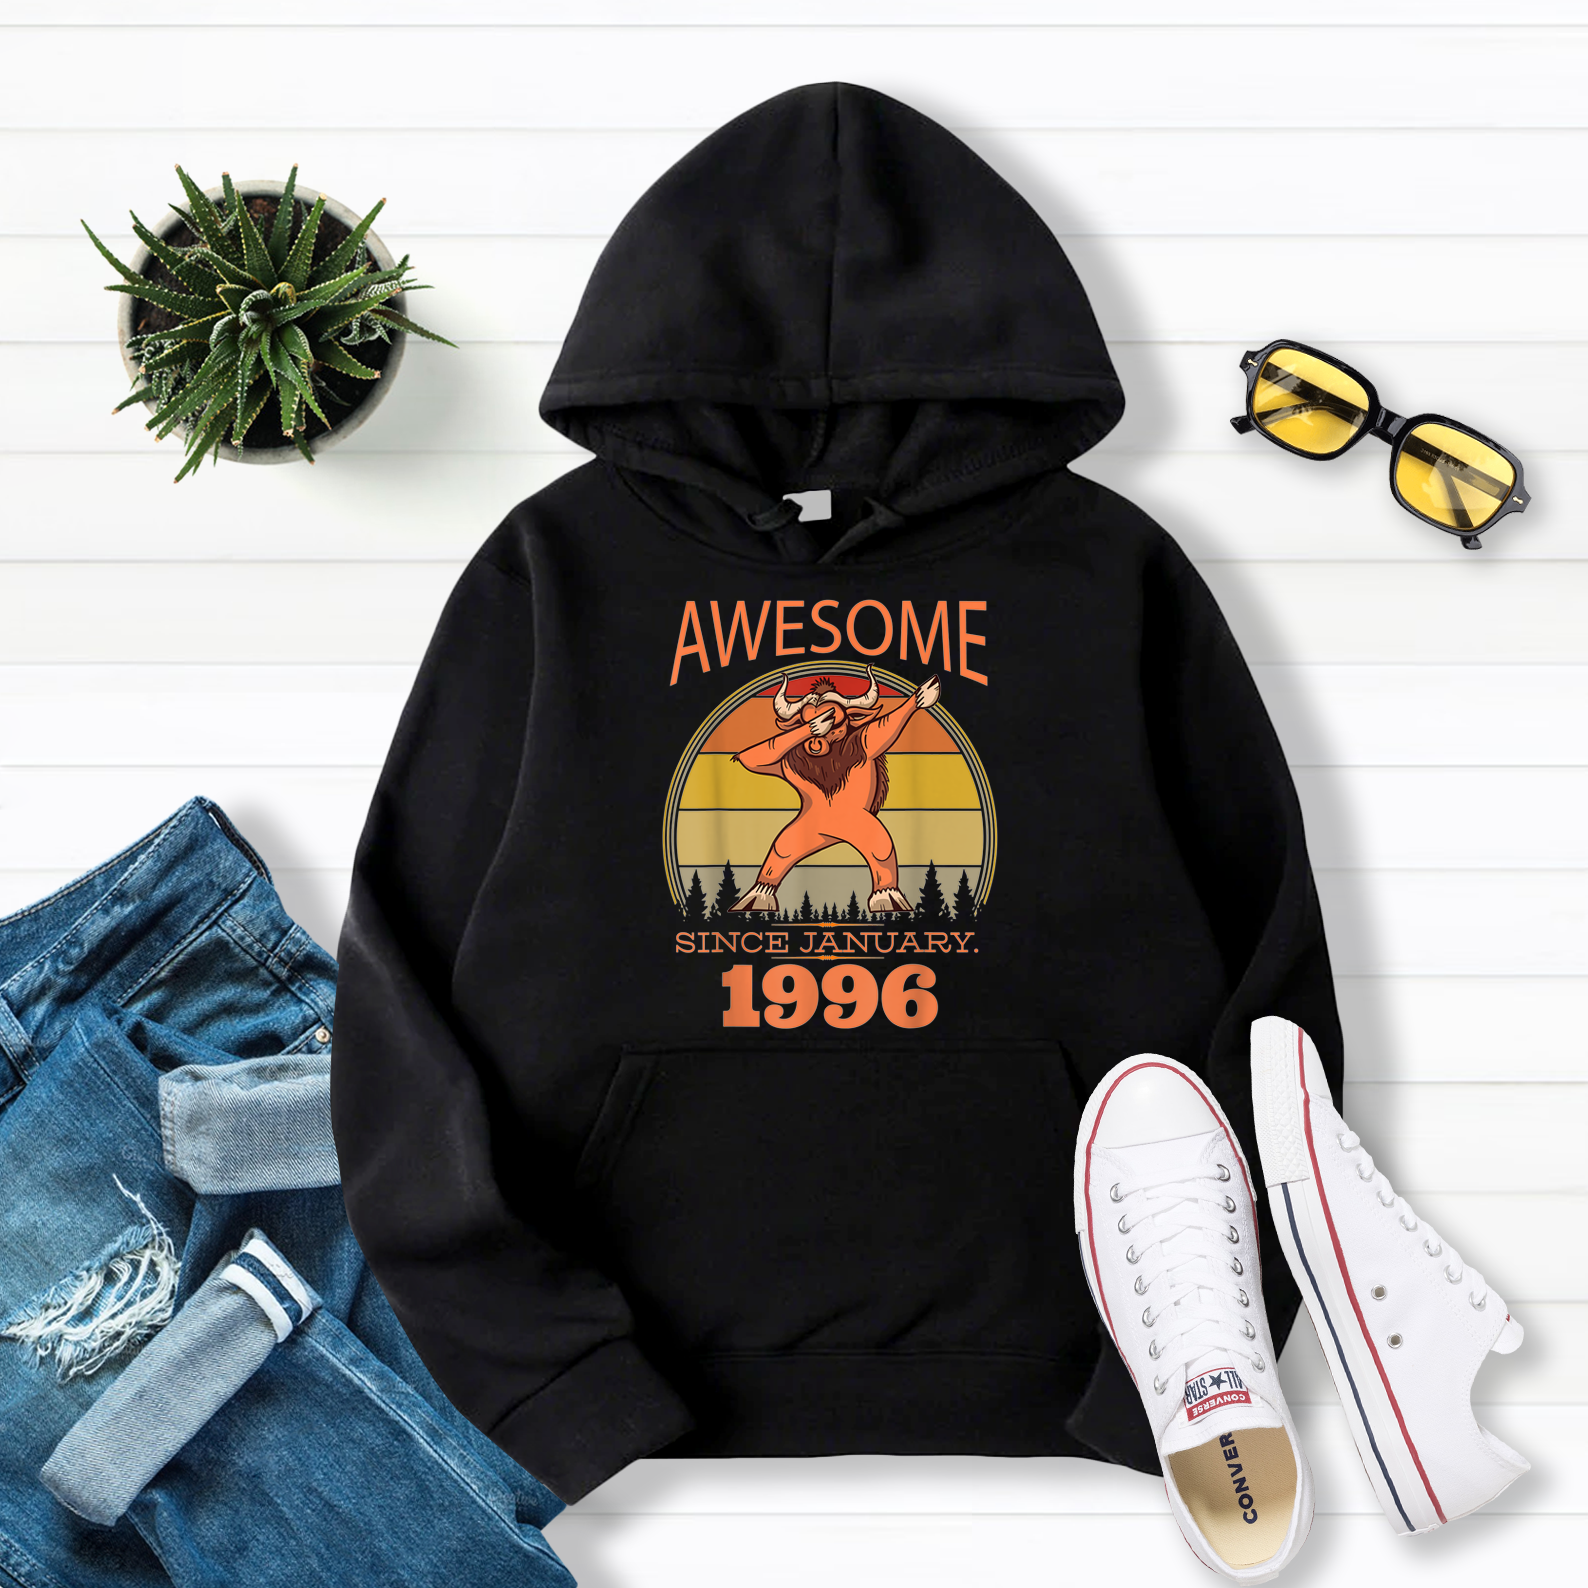 25 Years Old Birthday Awesome Since January 1996 Ox Dabbing Pullover Hoodie Black S-5XL